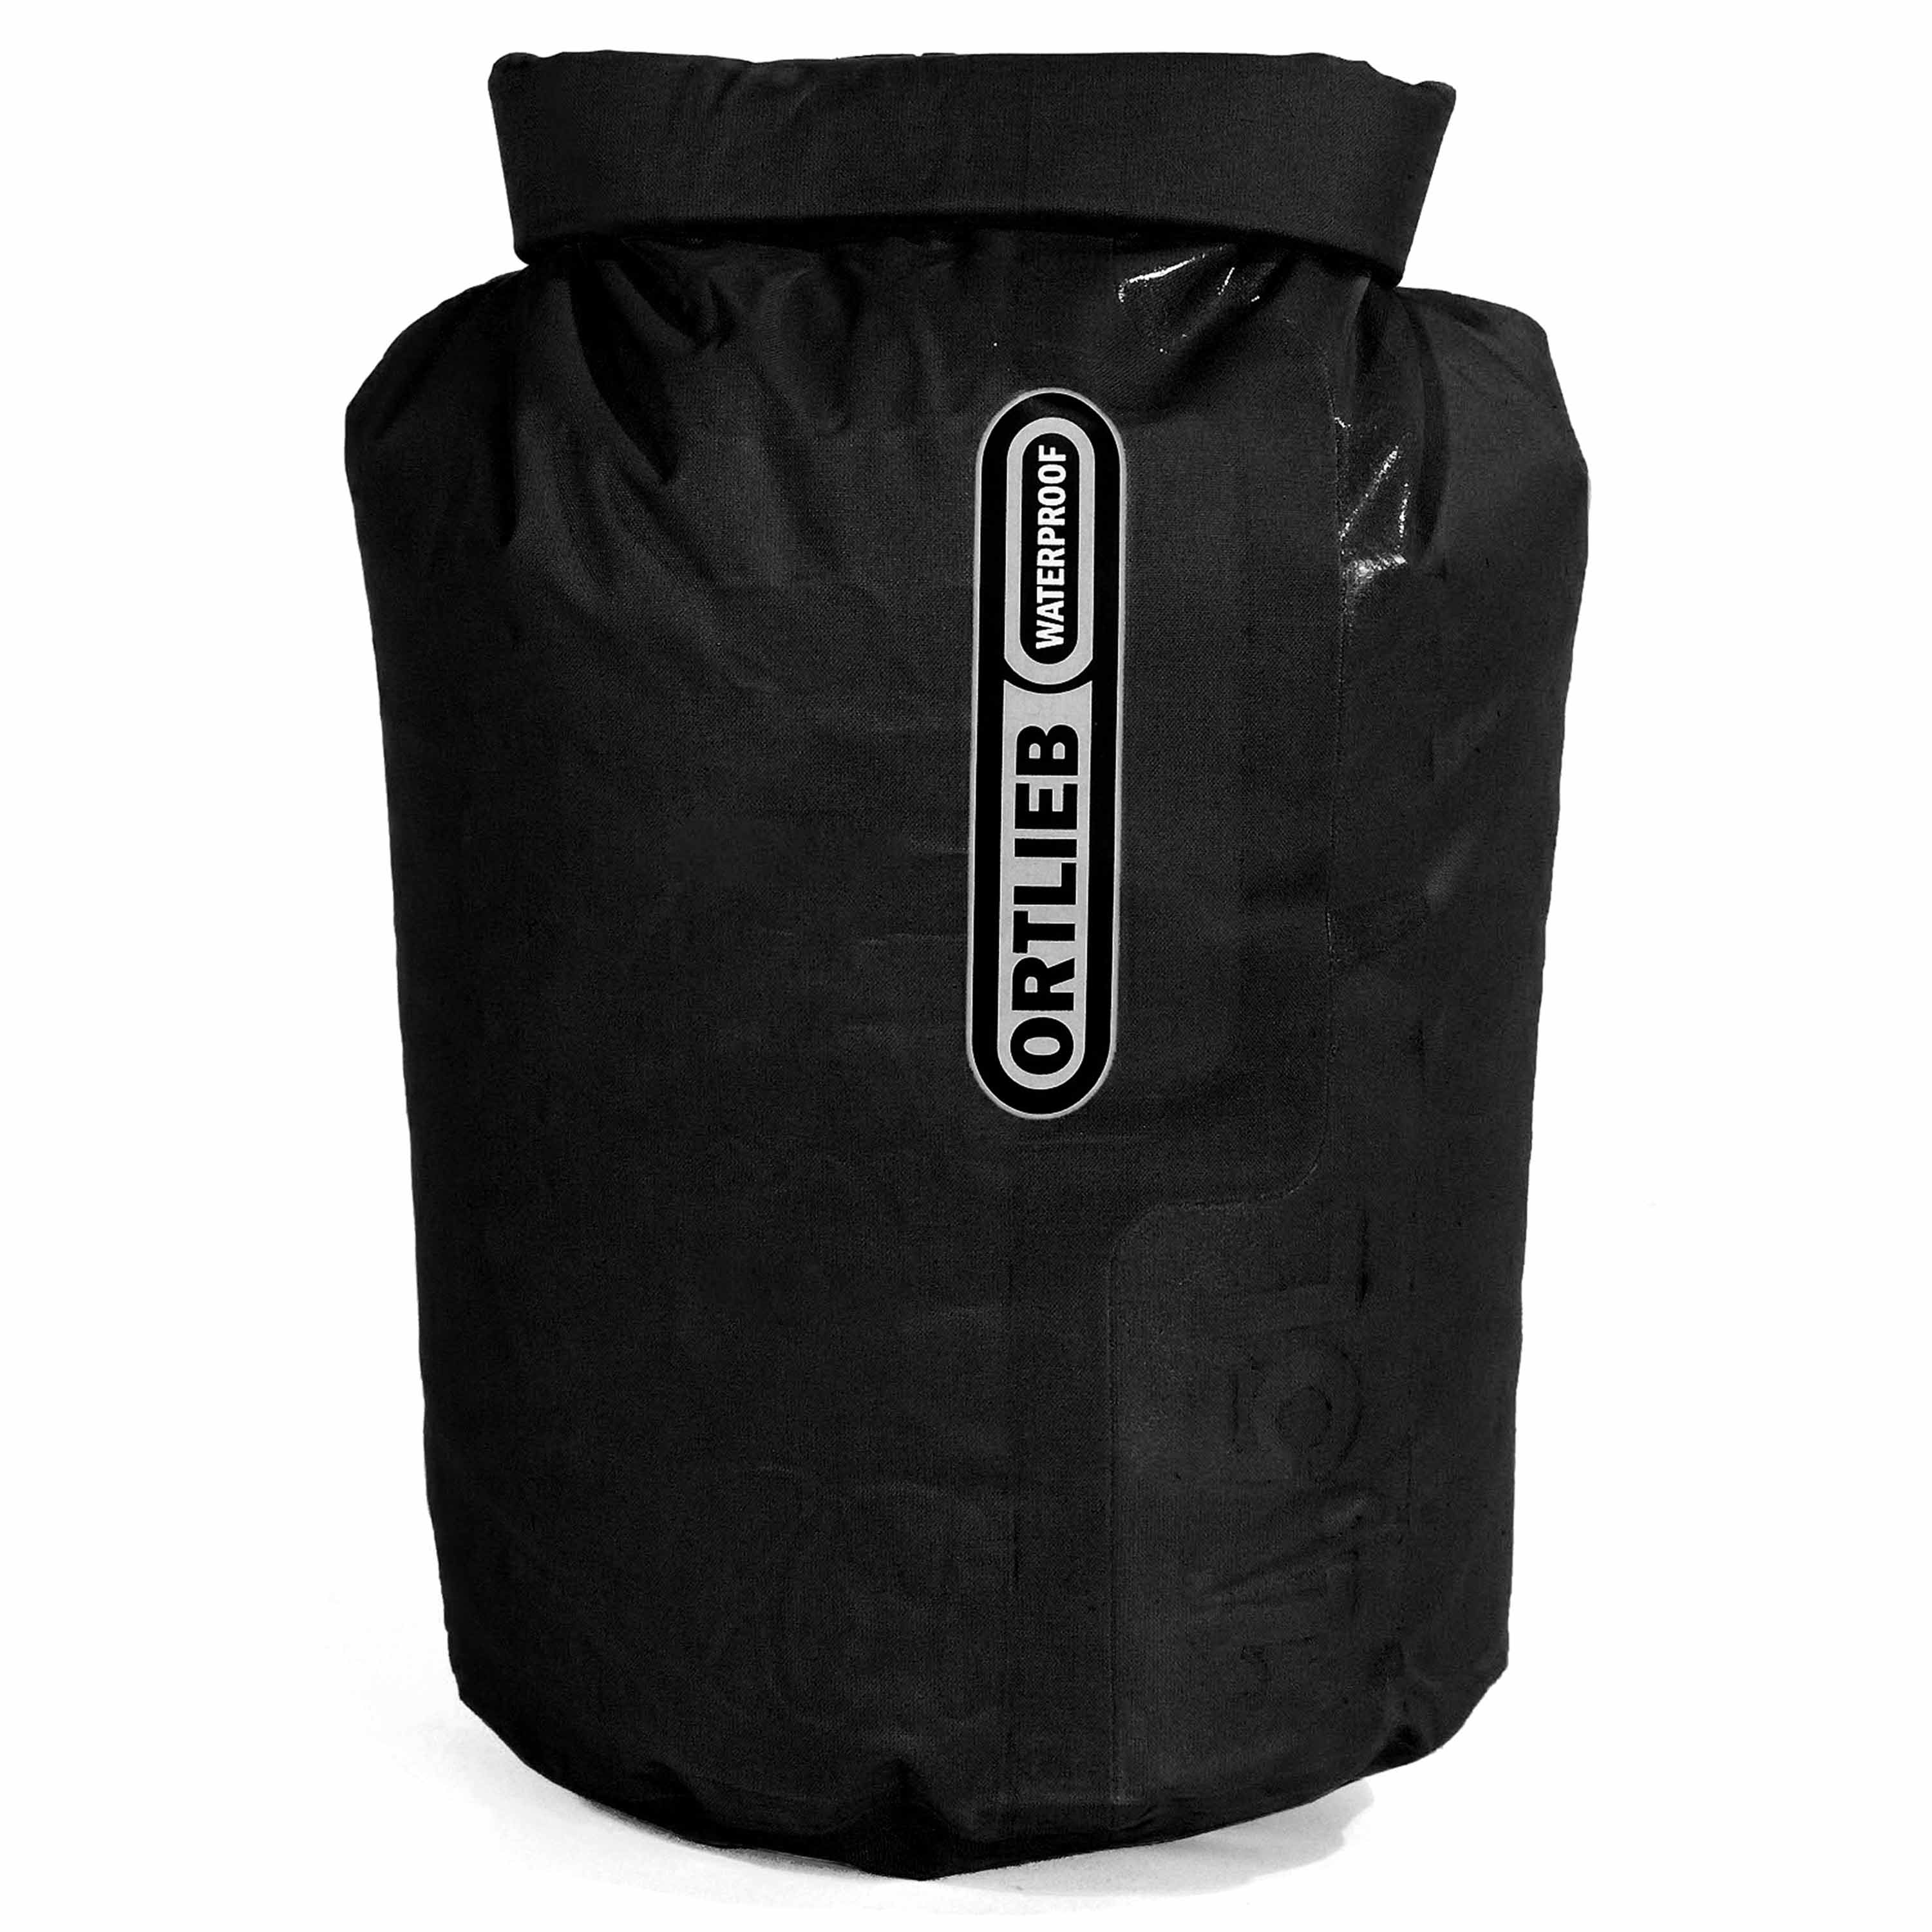 Highlander X-Lite Roll top drybags for Backpacking Drysack Pouch 8 Litre 